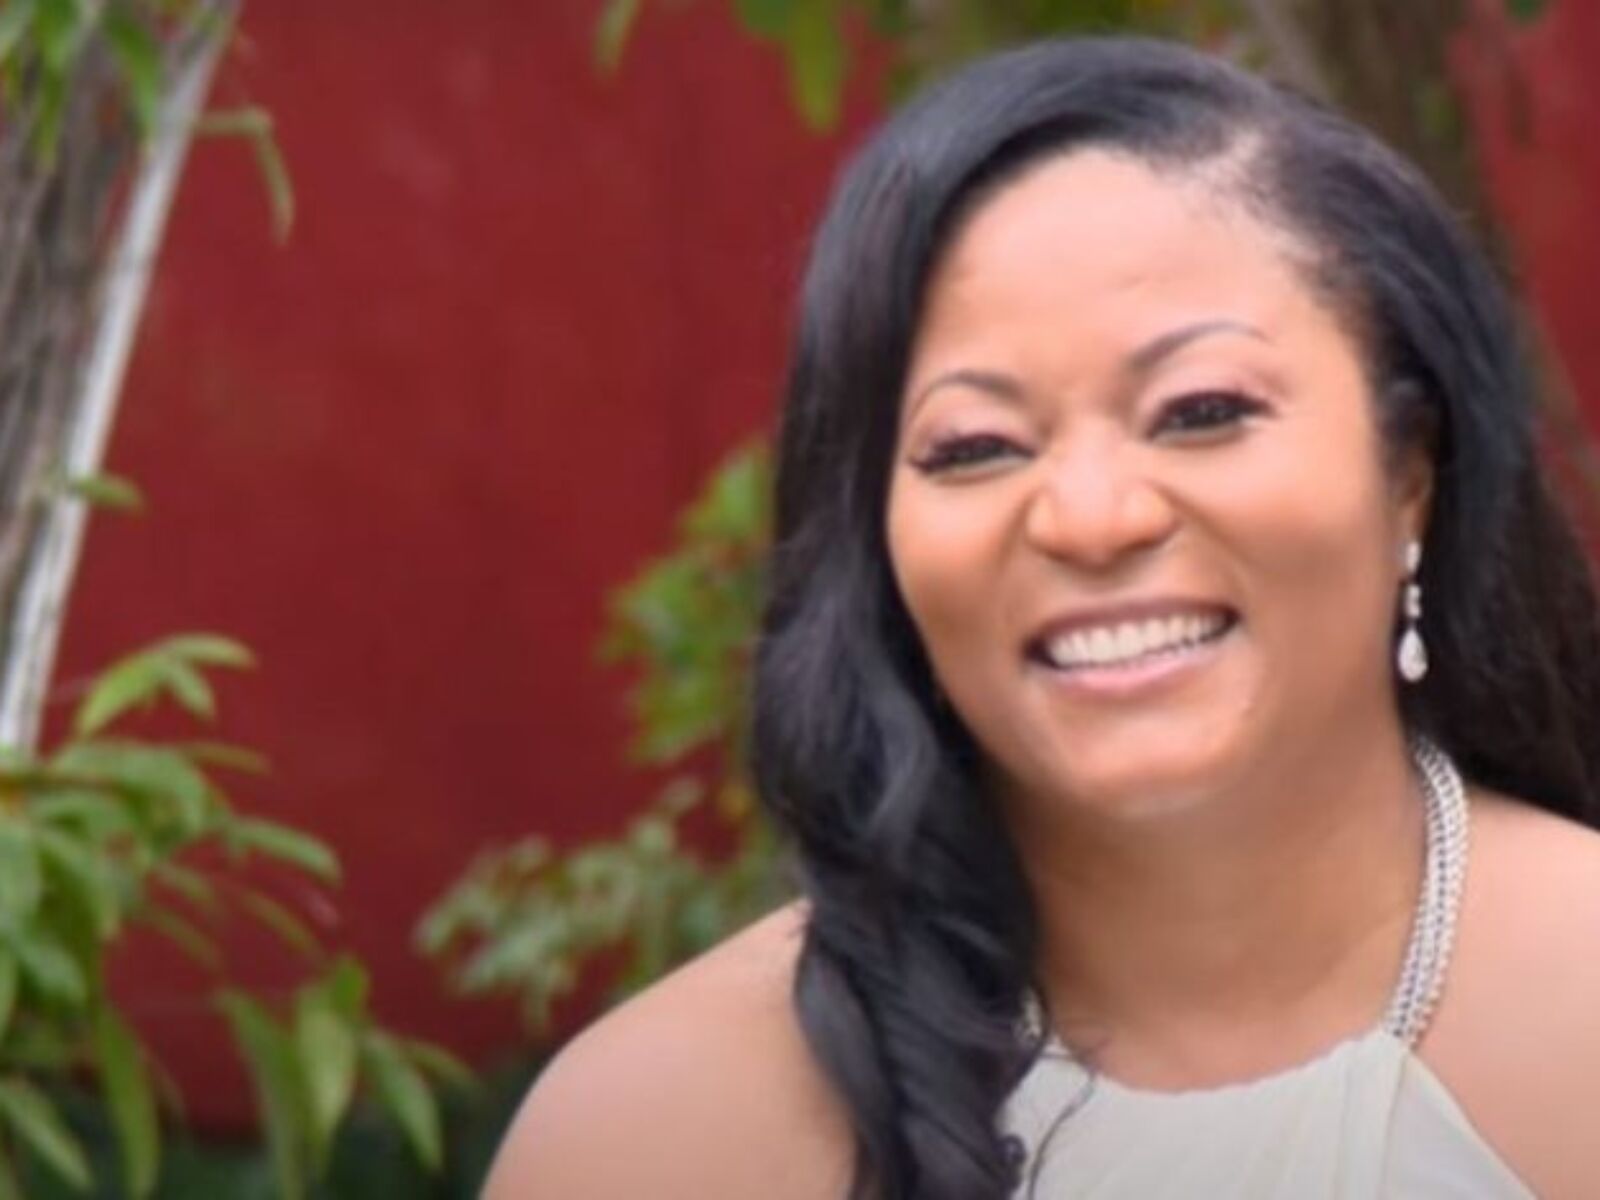 Jamaica’s Richest Woman? Trisha Bailey Shares Her Journey from Walking